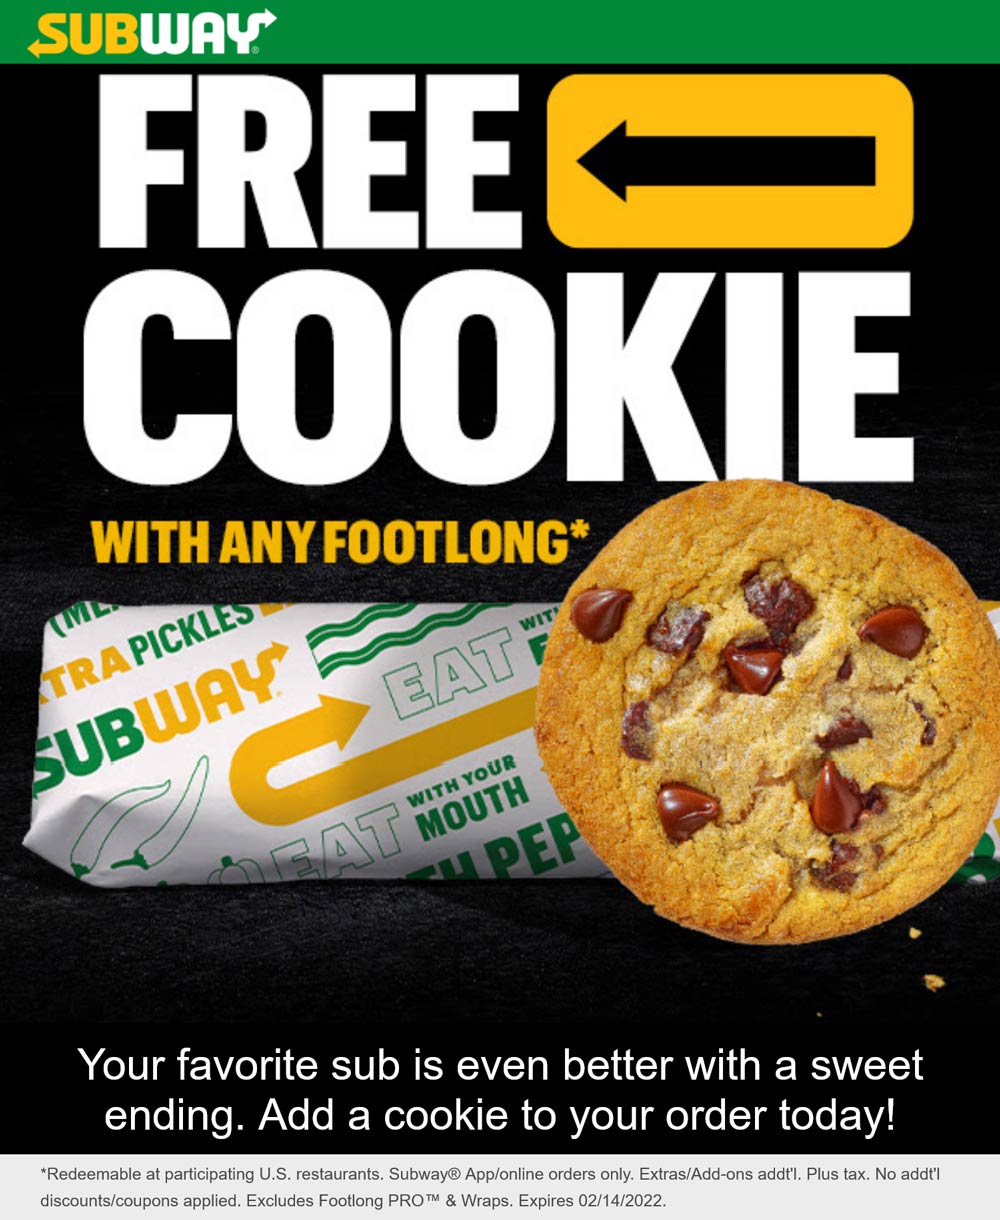 Subway restaurants Coupon  Free cookie with your footlong sandwich at Subway #subway 